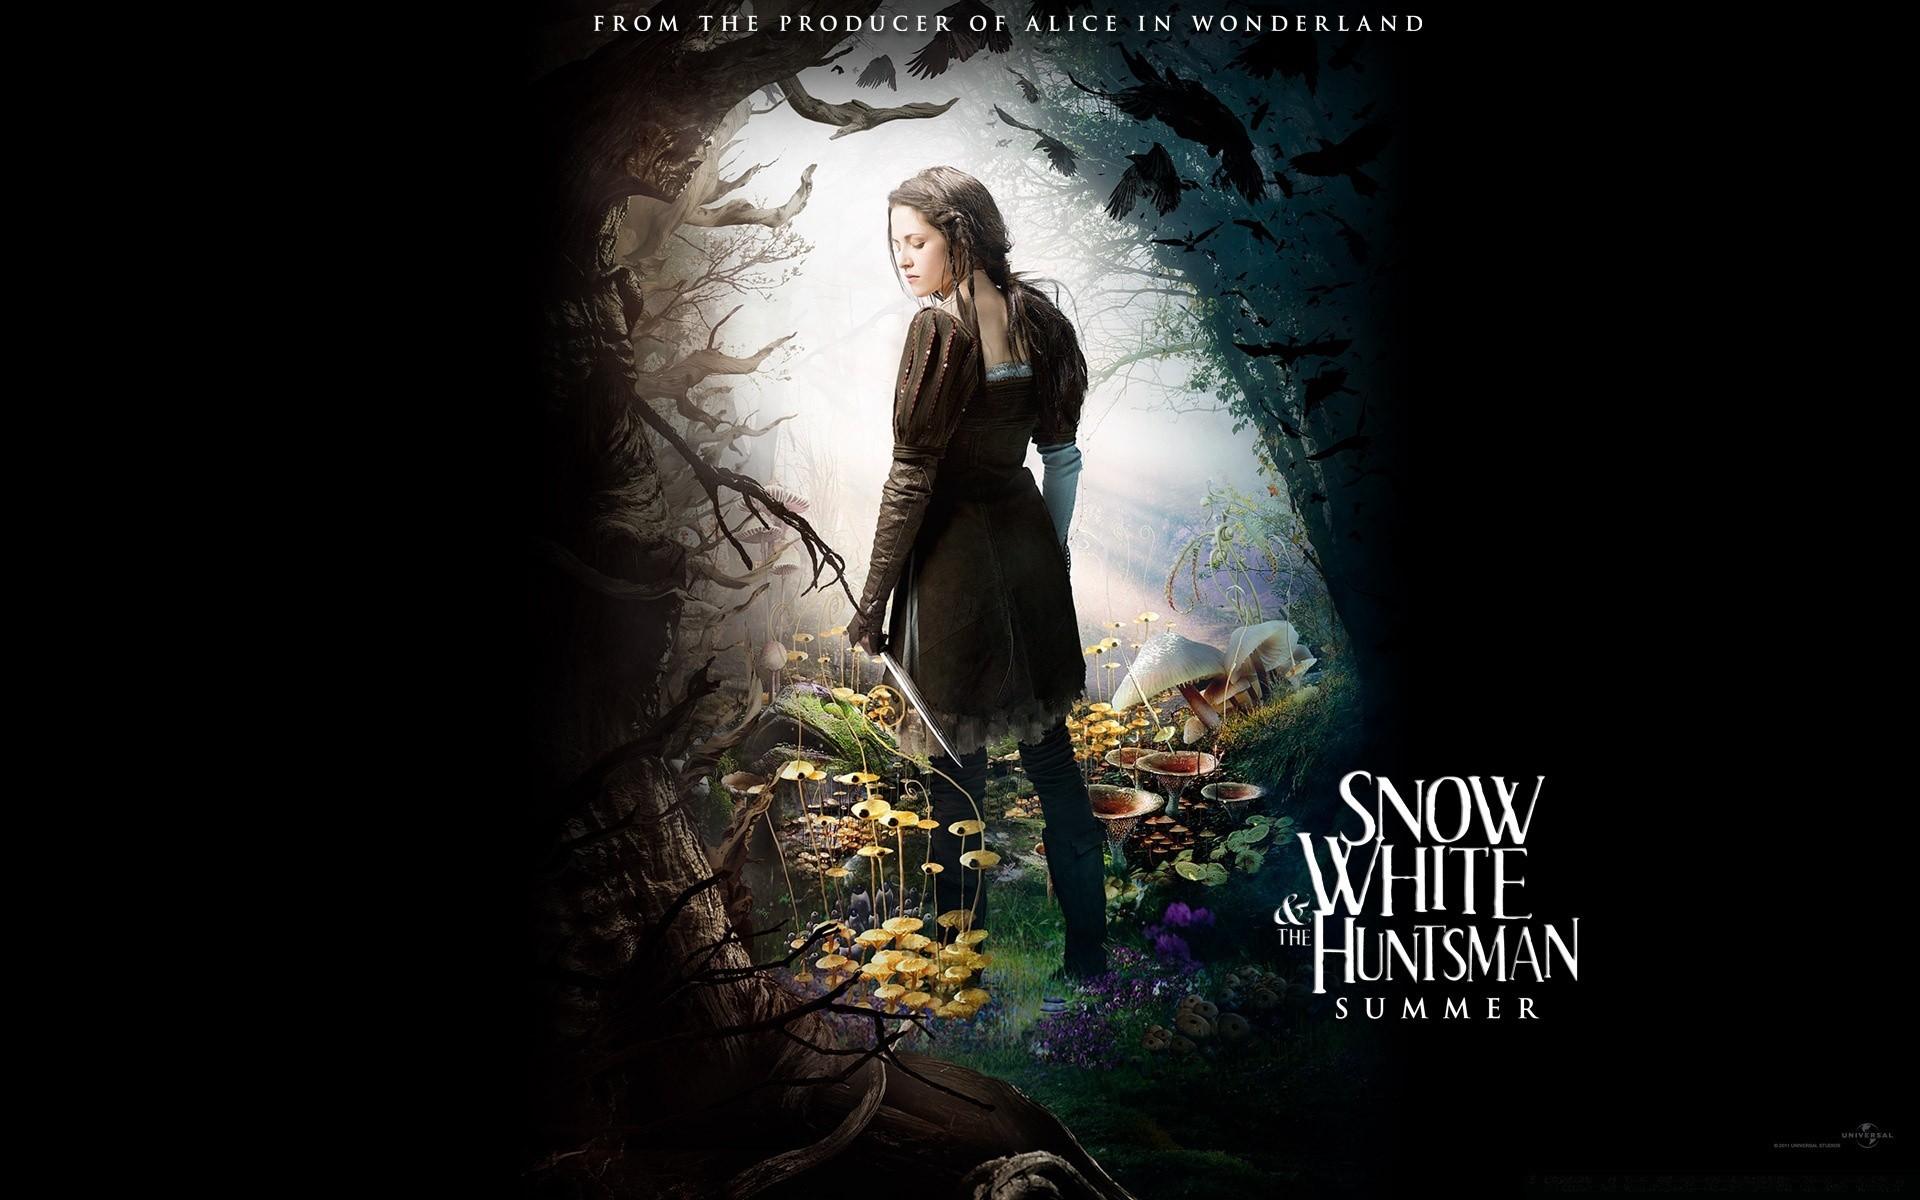 snow white & the huntsman horror woman dark adult outdoors mystery skittish nature scared